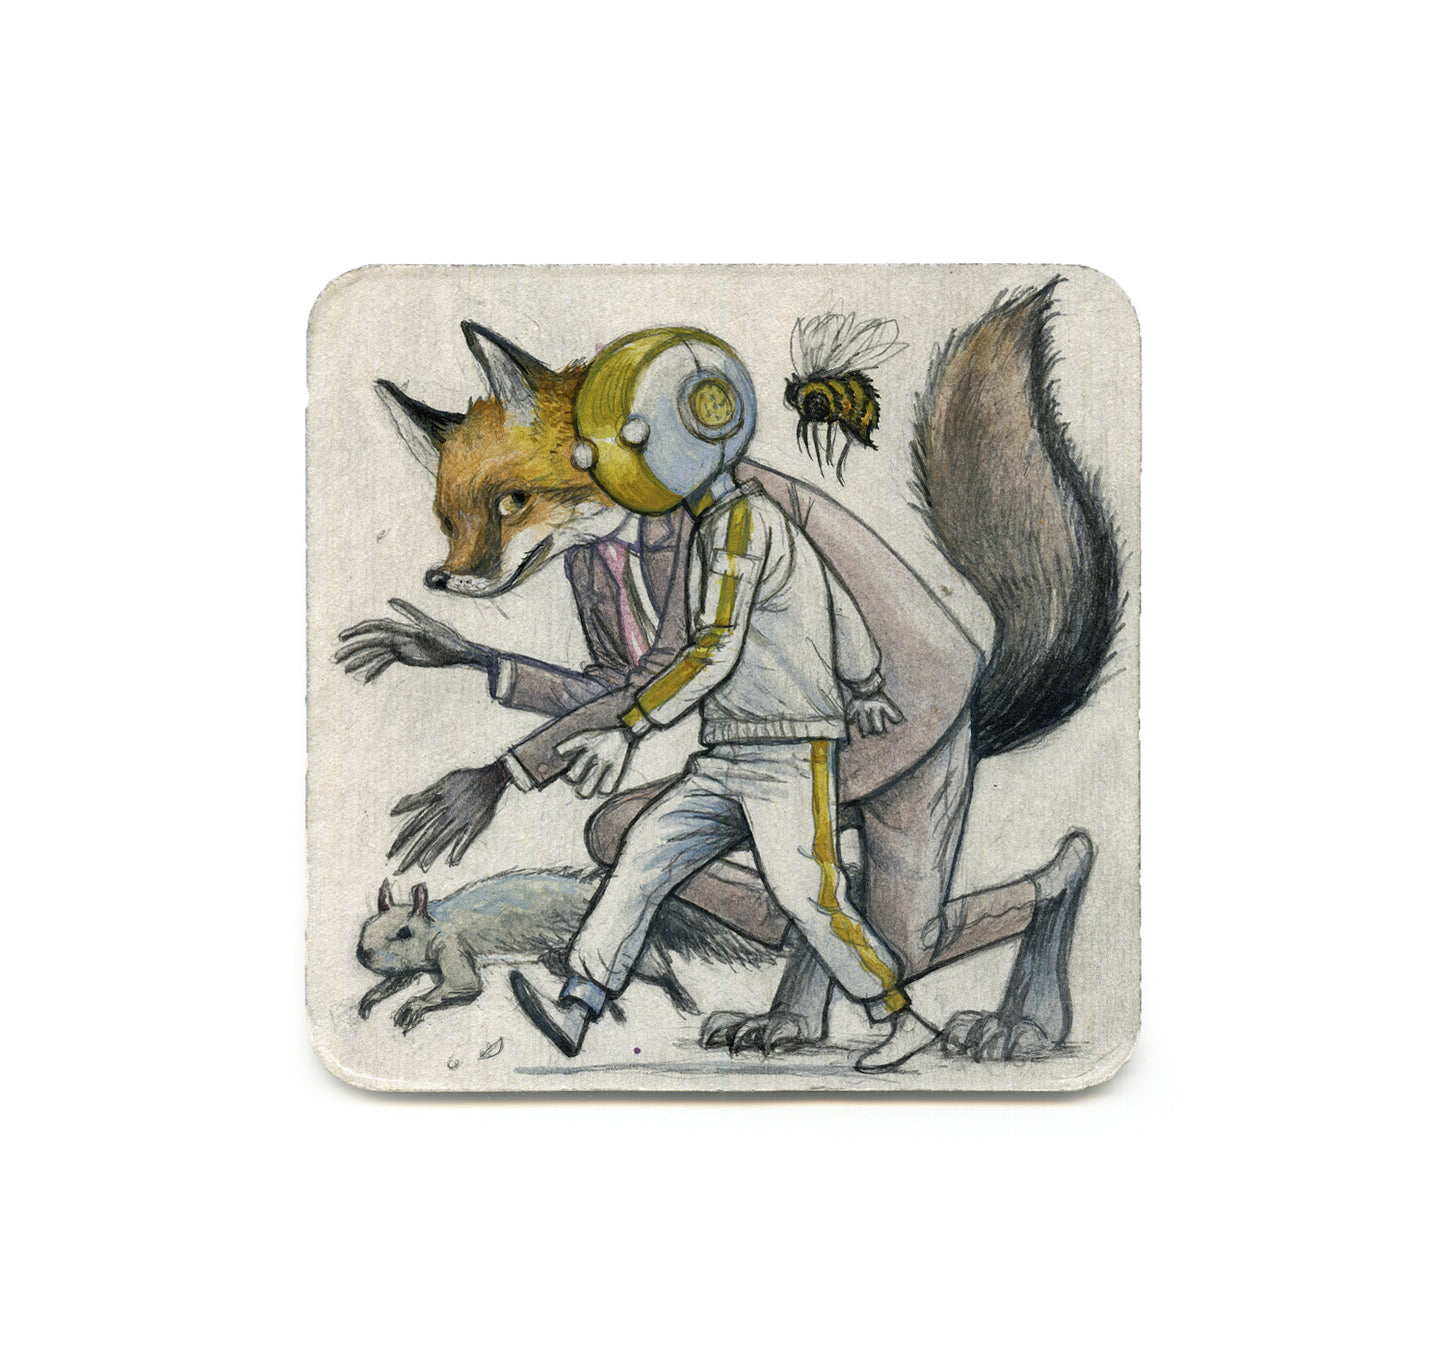 S2 Farel Dalrymple - Forgetting Jacked-Up Everything Coaster